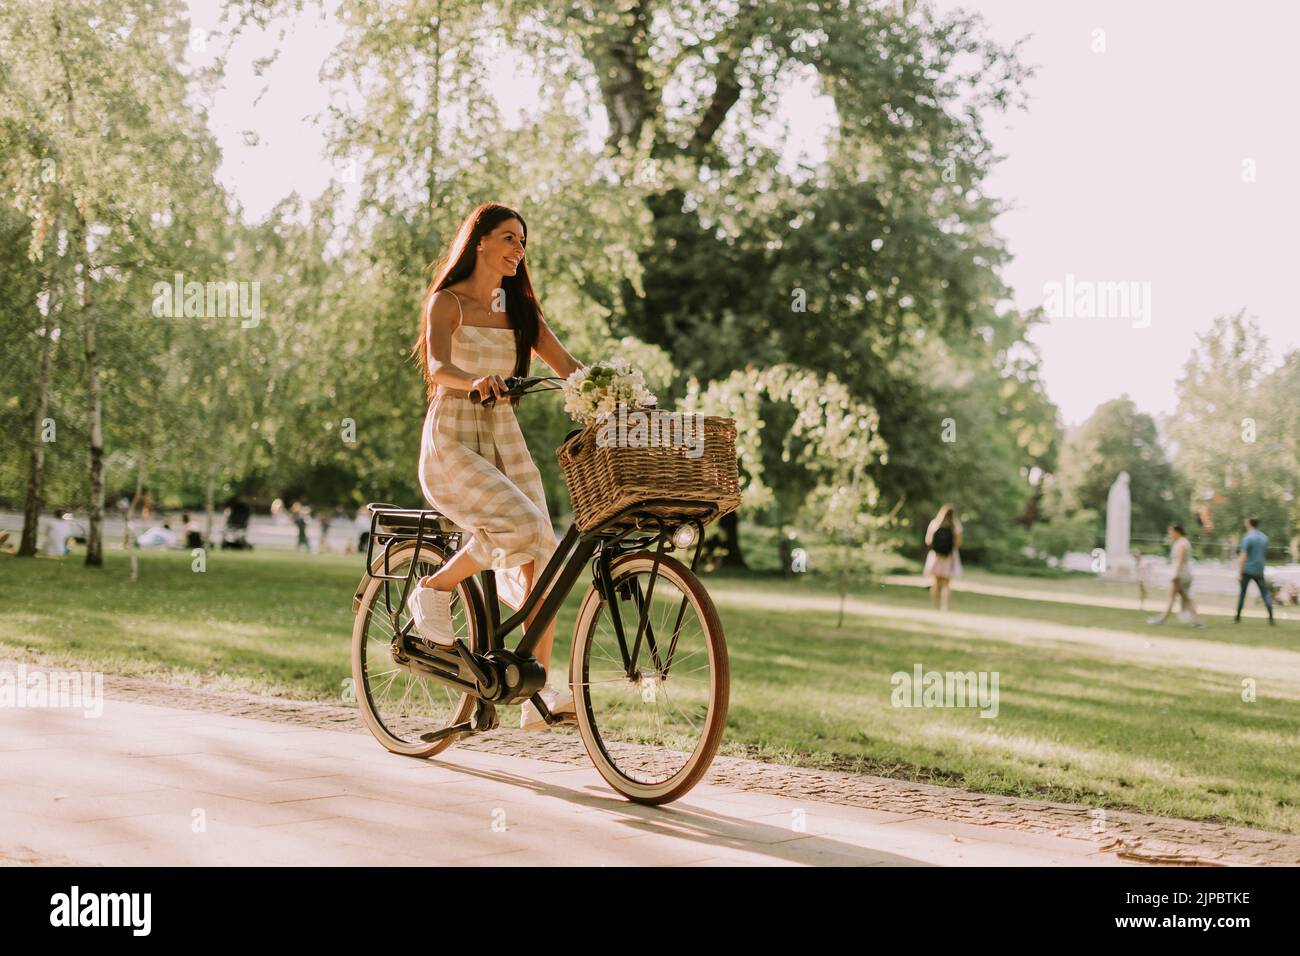 Pretty young woman with electric bike and flowers in the basket Stock Photo